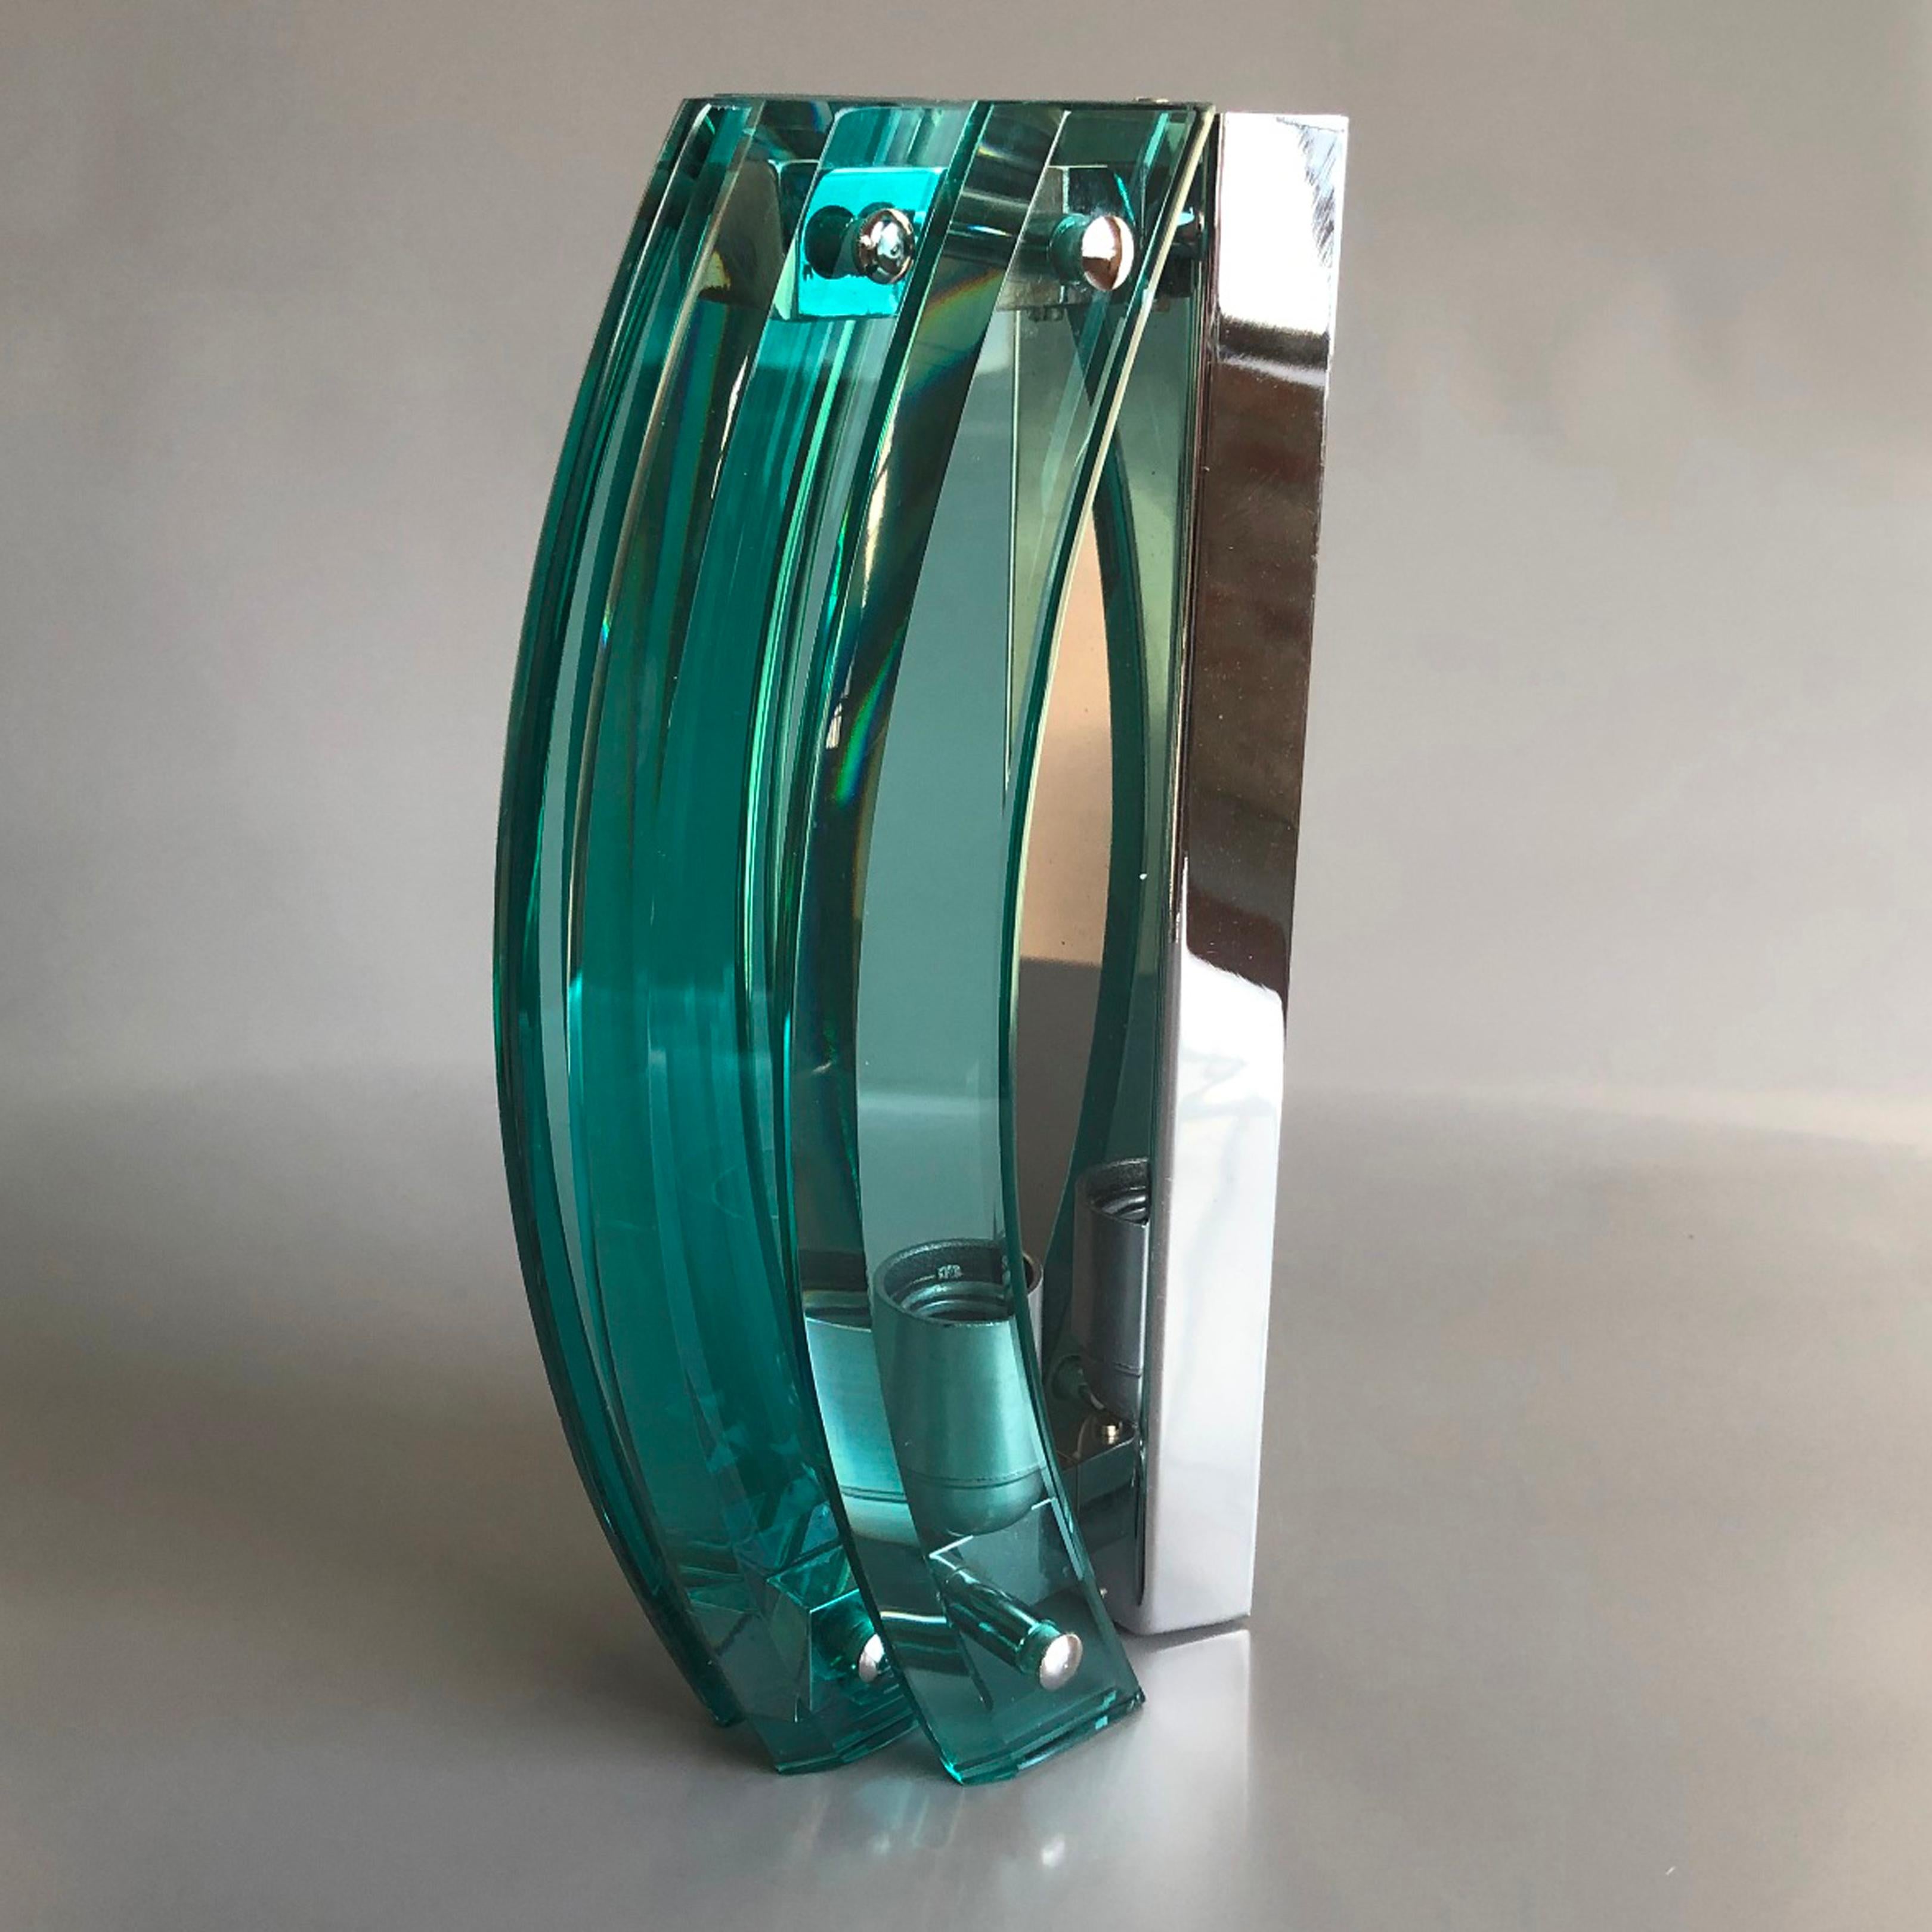 Pair of Emerald Green Murano Glass Wall Lights, Florence Italy 1970s For Sale 2